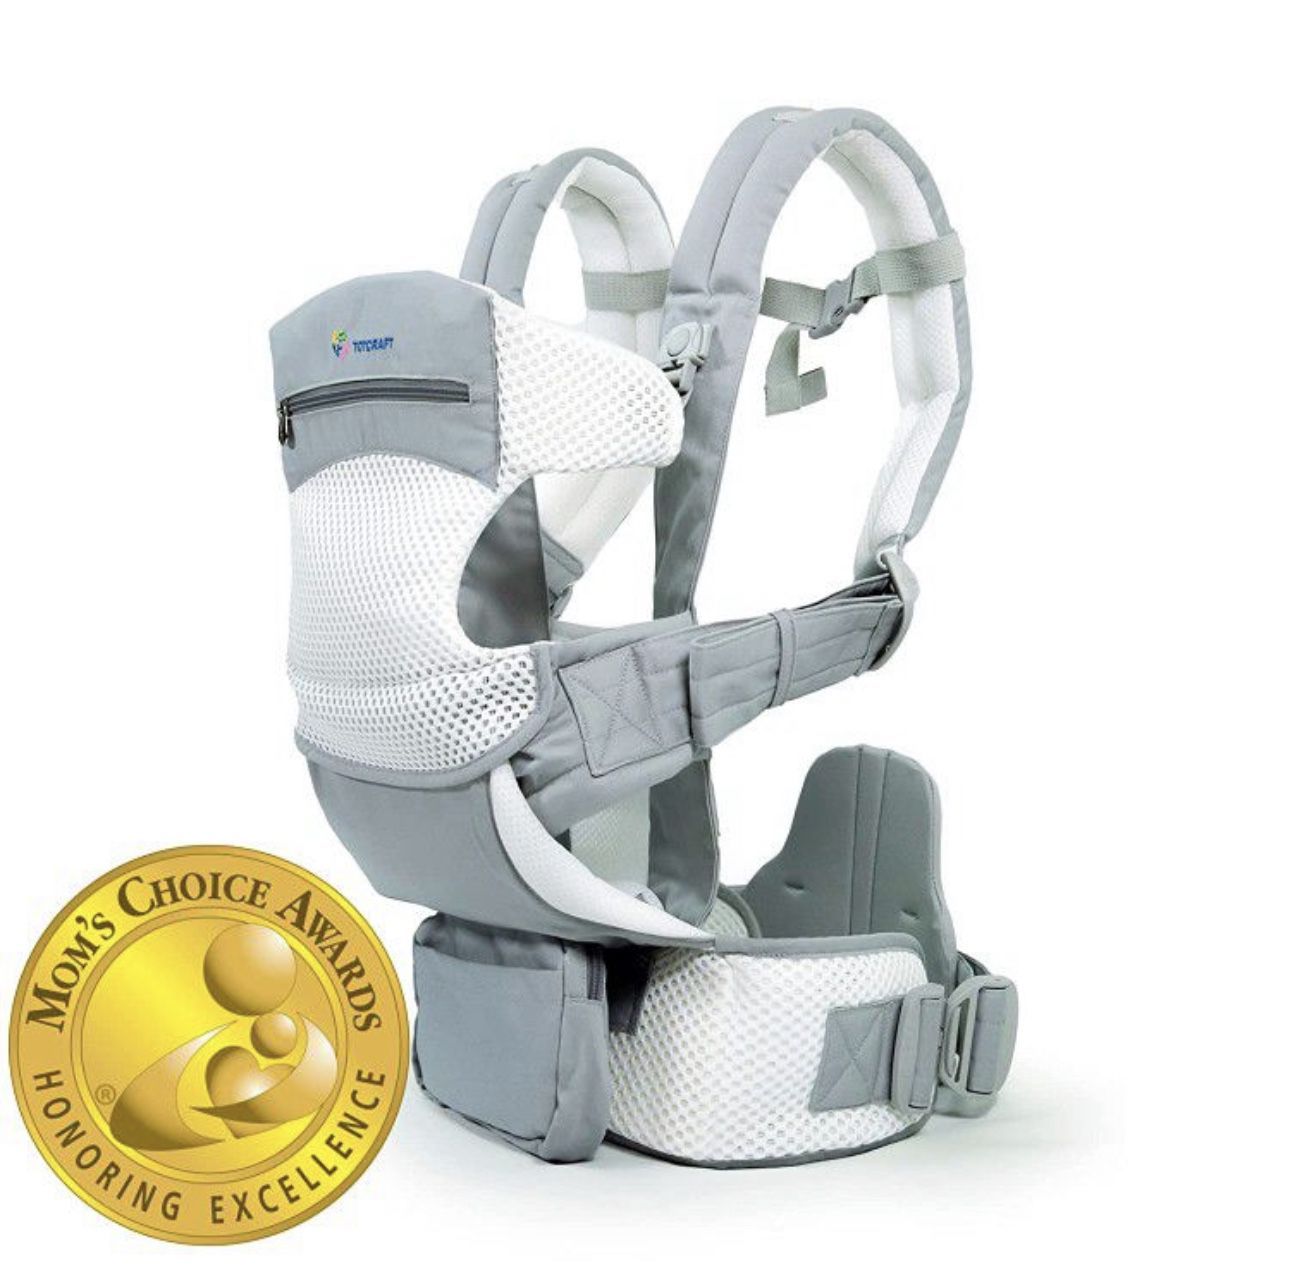 Organic Baby Carrier New Born to Toddler